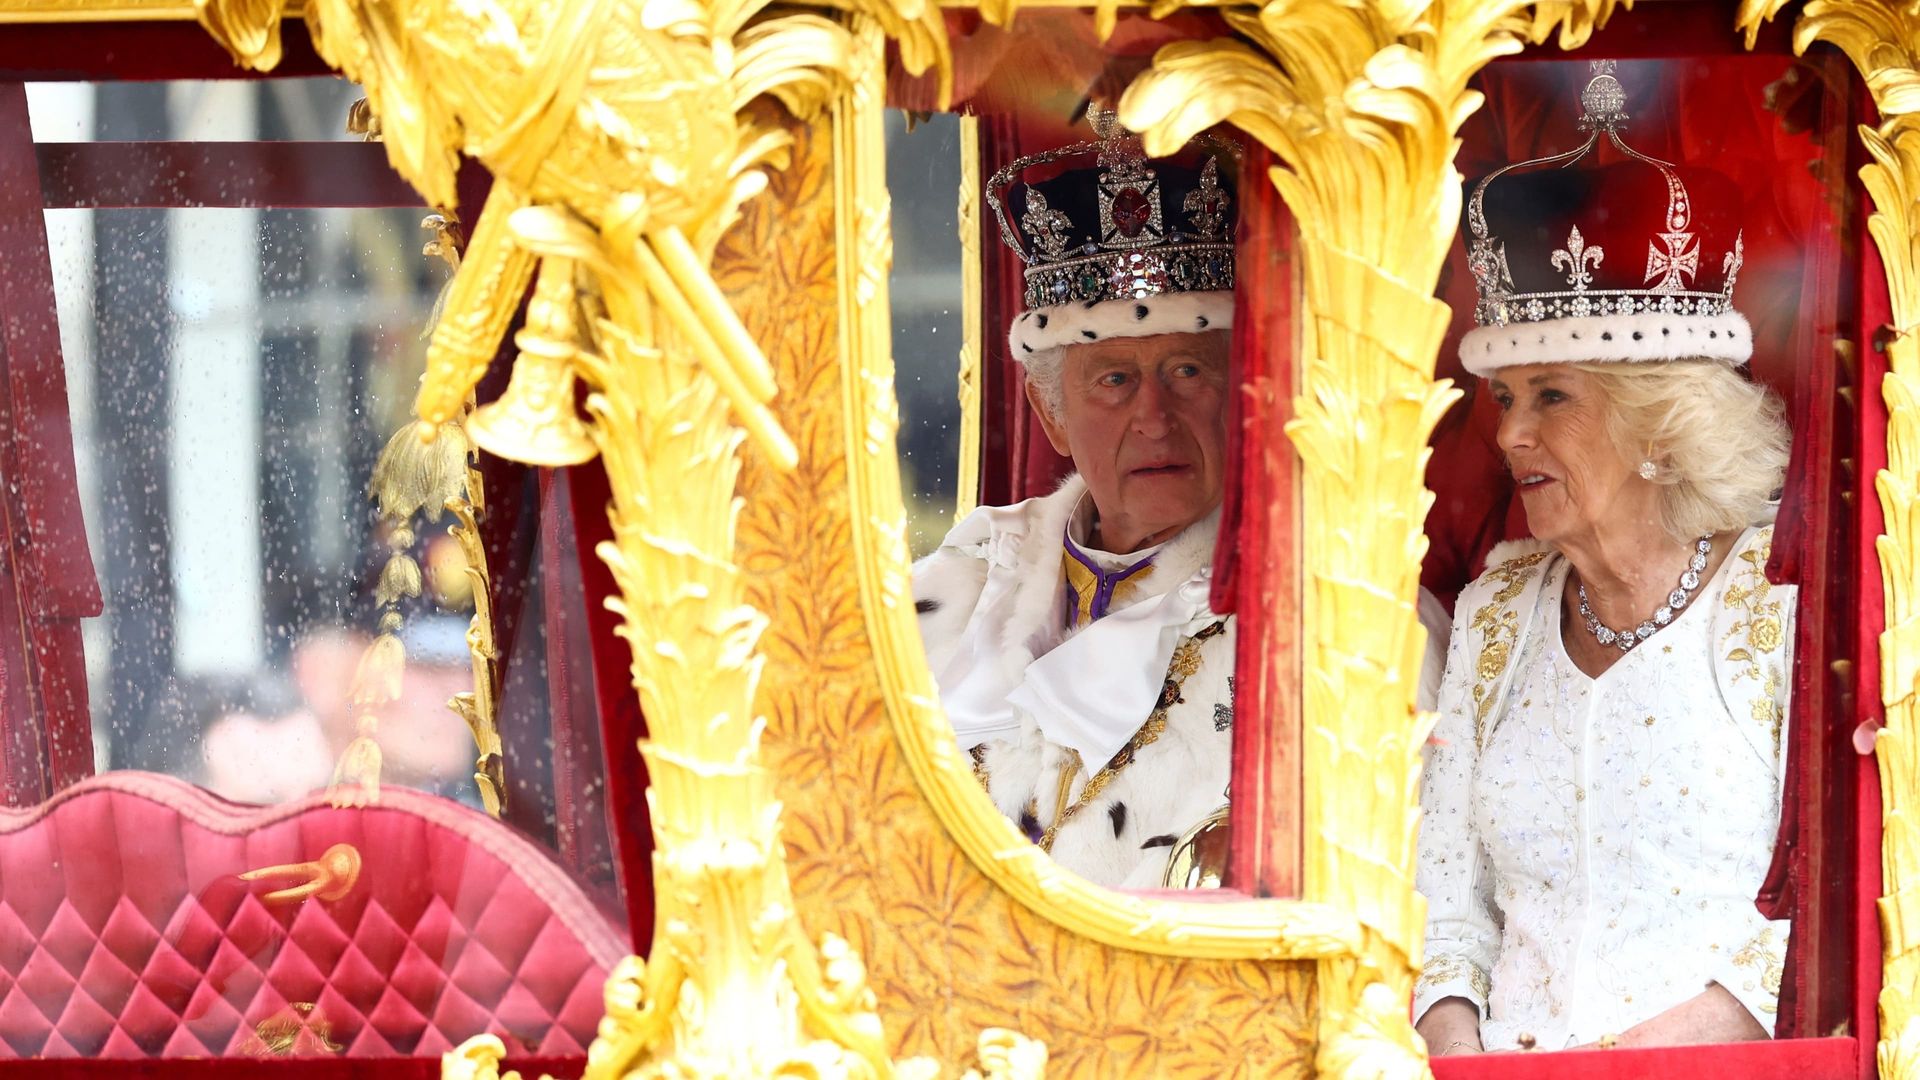 The Coronation and Crowning of King Charles III & Queen Camilla background